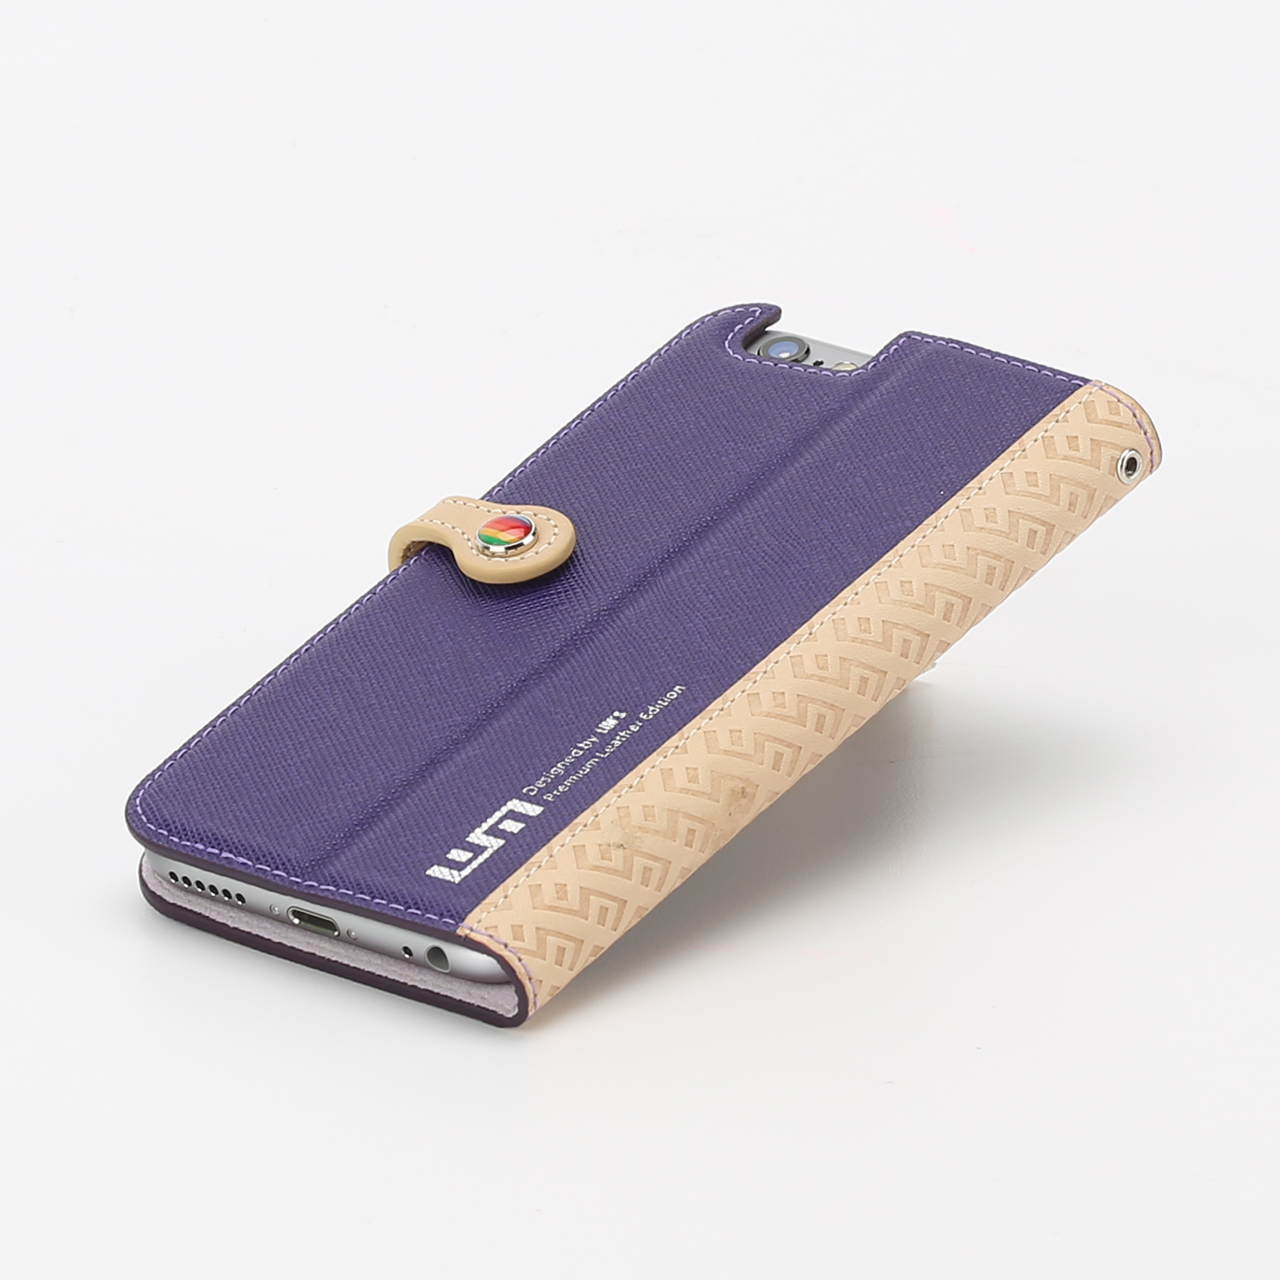 lims-saffiano-leather-slim-fit-edition-iphone-6-10.jpg